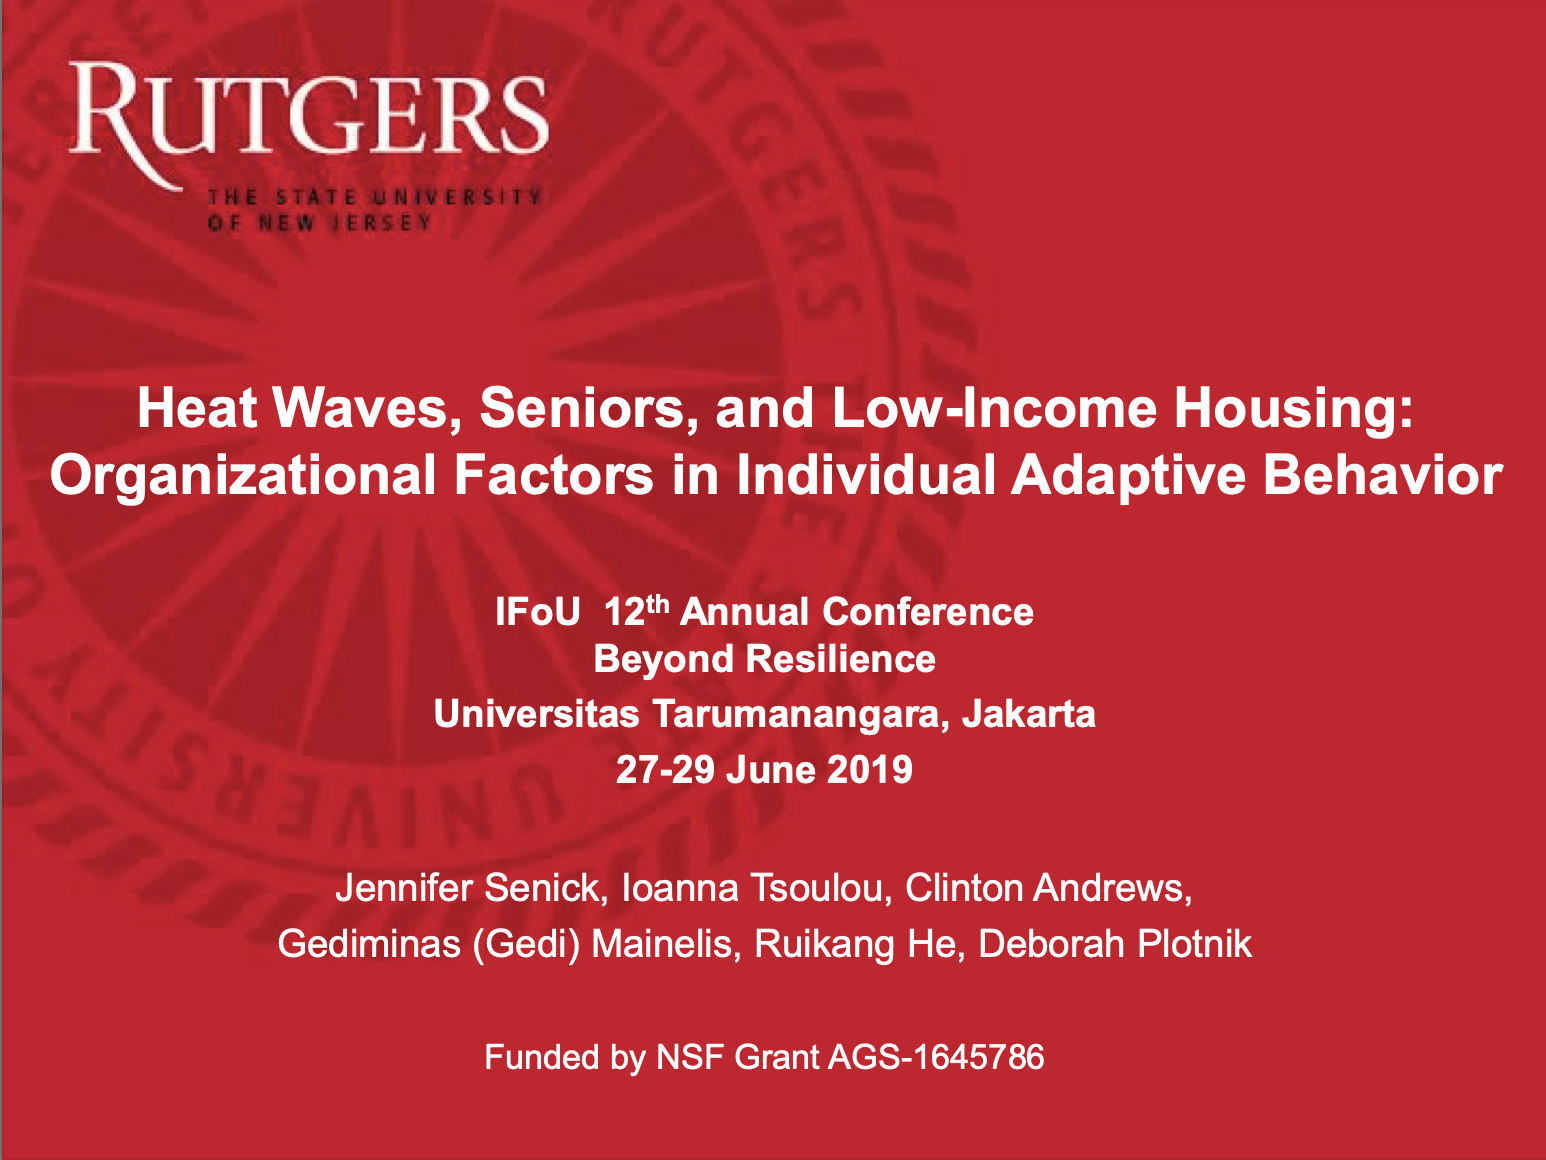 Heat Waves, Seniors, and Low-Income Housing